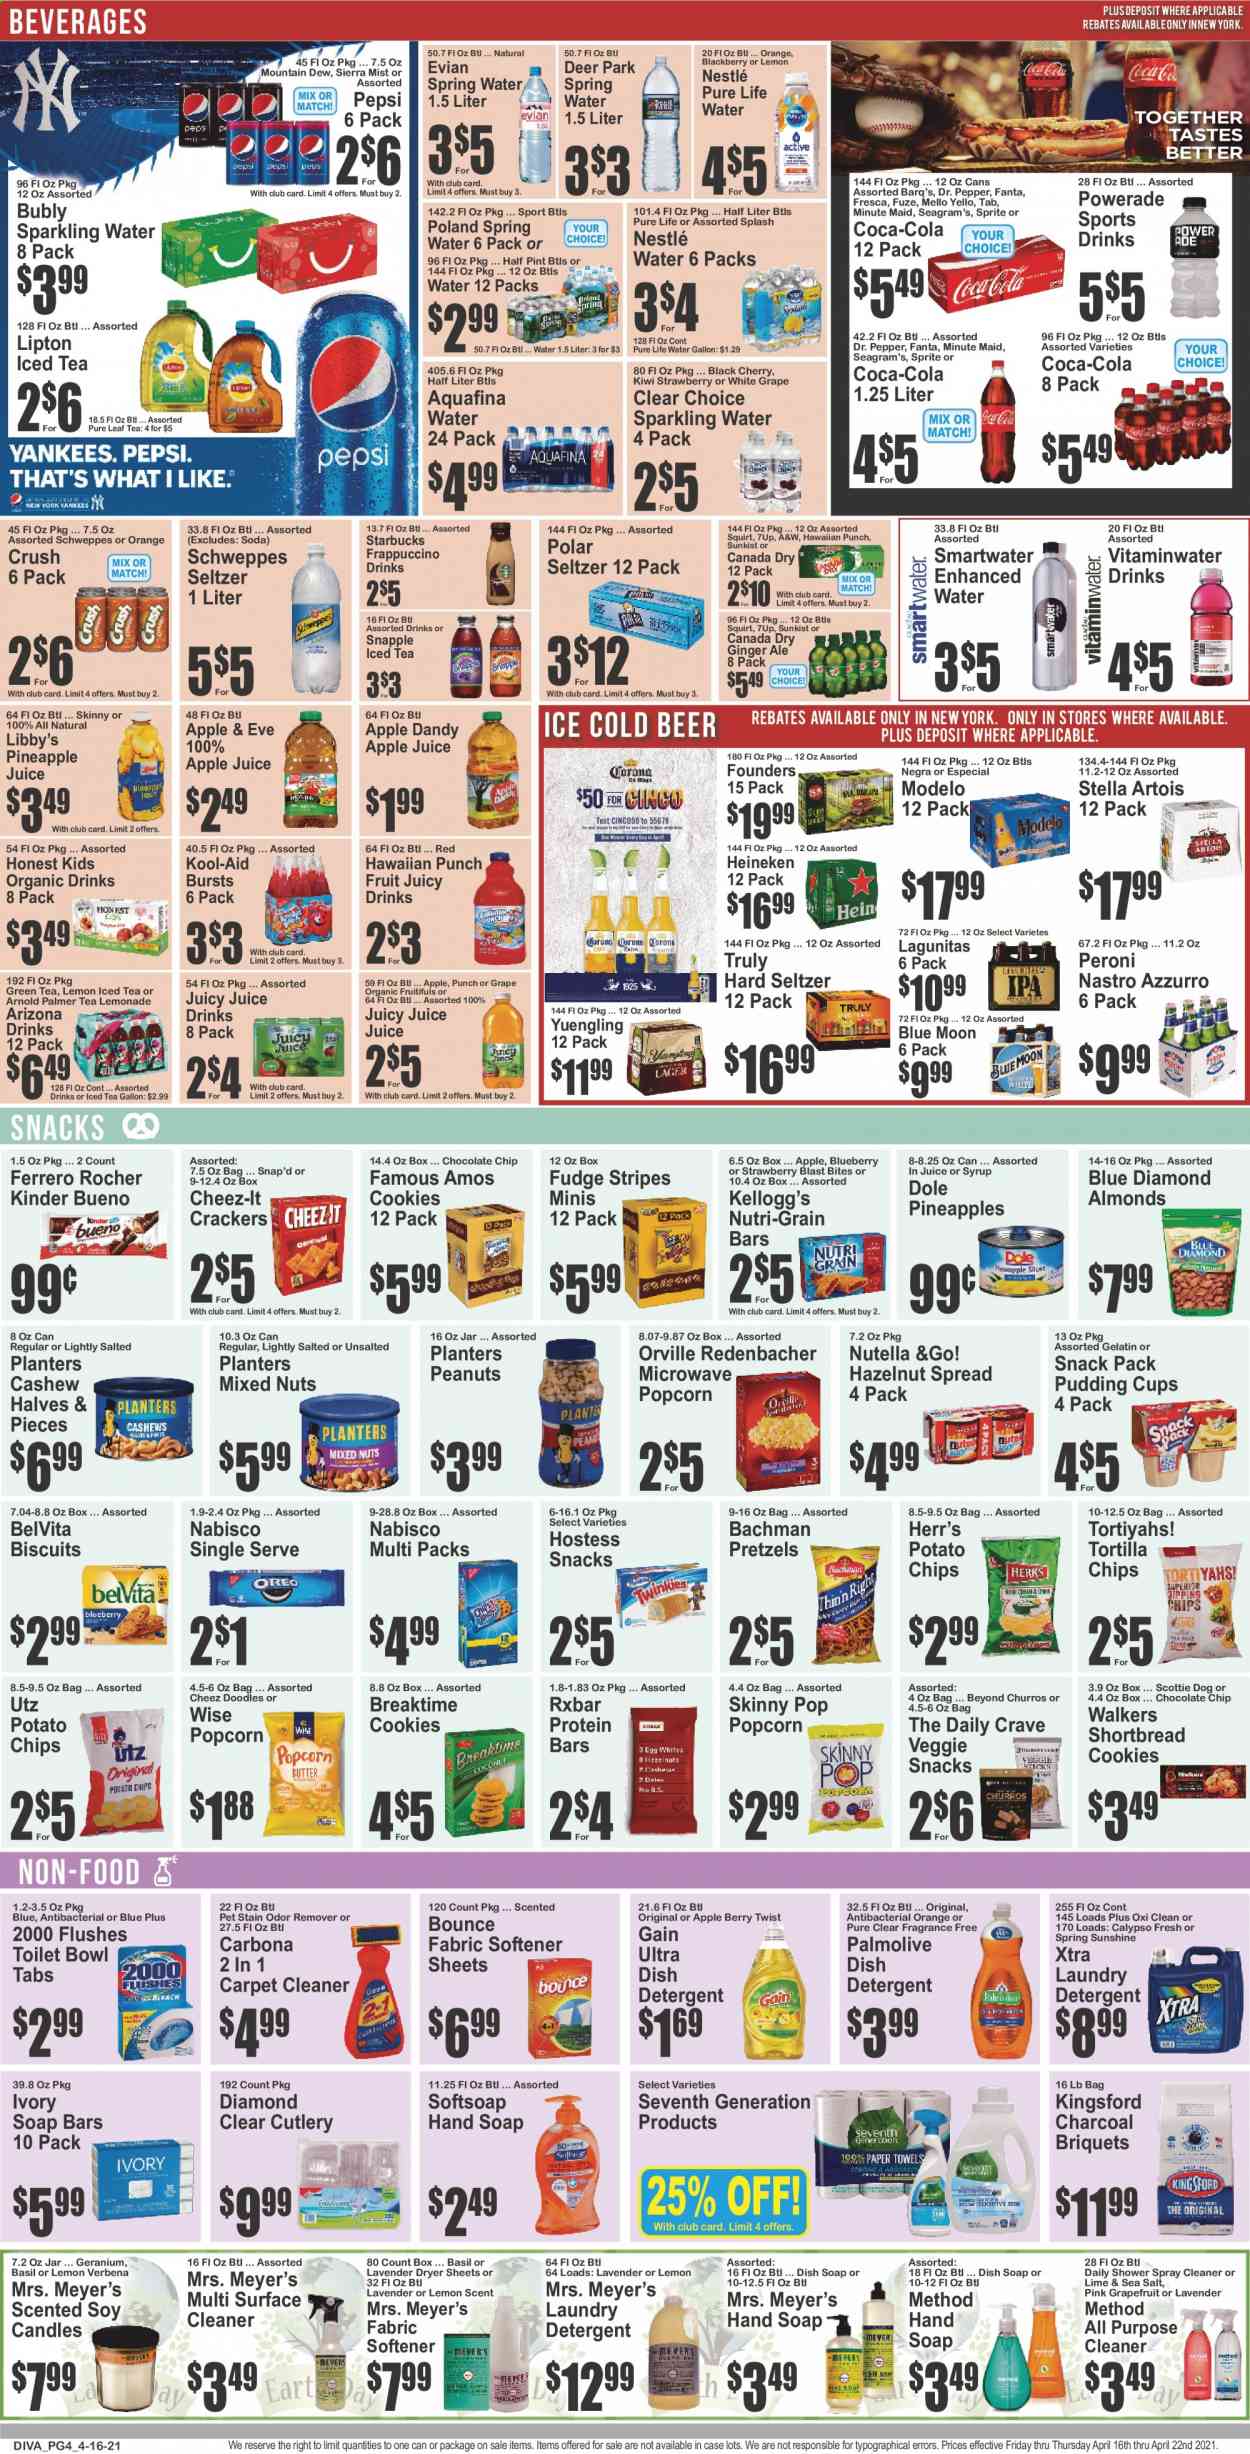 thumbnail - Key Food Flyer - 04/16/2021 - 04/22/2021 - Sales products - pretzels, Dole, grapefruits, kiwi, oranges, pudding, Oreo, butter, Sunshine, cookies, fudge, Nestlé, Nutella, Ferrero Rocher, crackers, Kellogg's, Kinder Bueno, biscuit, Nutri-Grain bars, tortilla chips, potato chips, chips, popcorn, Cheez-It, Skinny Pop, protein bar, churros, belVita, Nutri-Grain, esponja, hazelnut spread, almonds, cashews, peanuts, mixed nuts, Planters, Blue Diamond, apple juice, Canada Dry, Coca-Cola, lemonade, Mountain Dew, Schweppes, Sprite, pineapple juice, Powerade, Pepsi, soda, juice, Fanta, Lipton, ice tea, Dr. Pepper, 7UP, AriZona, Snapple, Sierra Mist, fruit punch, Aquafina, spring water, sparkling water, Pure Life Water, Smartwater, Evian, green tea, Pure Leaf, Starbucks, frappuccino, rum, Hard Seltzer, TRULY, beer, Stella Artois, Blue Moon, Yuengling, Heineken, Peroni, Modelo, kitchen towels, paper towels, detergent, Gain, surface cleaner, cleaner, all purpose cleaner, Carbona, fabric softener, laundry detergent, Bounce, dryer sheets, XTRA, Softsoap, hand soap, Palmolive, soap, cup, candle, gelatin, Go!, pineapple. Page 4.